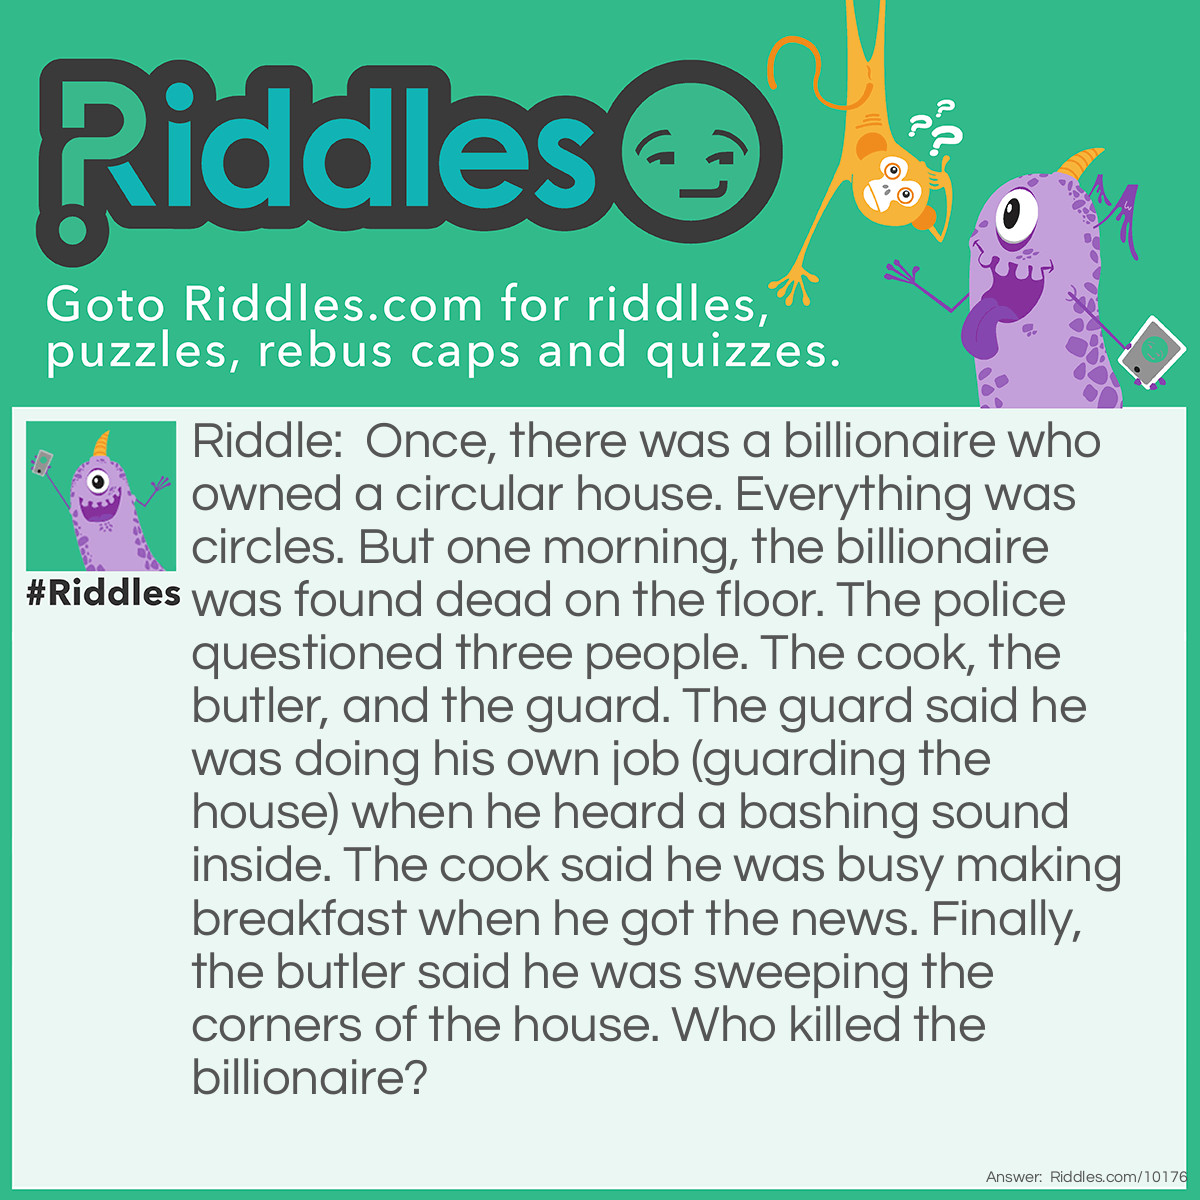 Riddle: Once, there was a billionaire who owned a circular house. Everything was circles. But one morning, the billionaire was found dead on the floor. The police questioned three people. The cook, the butler, and the guard. The guard said he was doing his own job (guarding the house) when he heard a bashing sound inside. The cook said he was busy making breakfast when he got the news. Finally, the butler said he was sweeping the corners of the house. Who killed the billionaire? Answer: The butler. There's no corners in a circle.